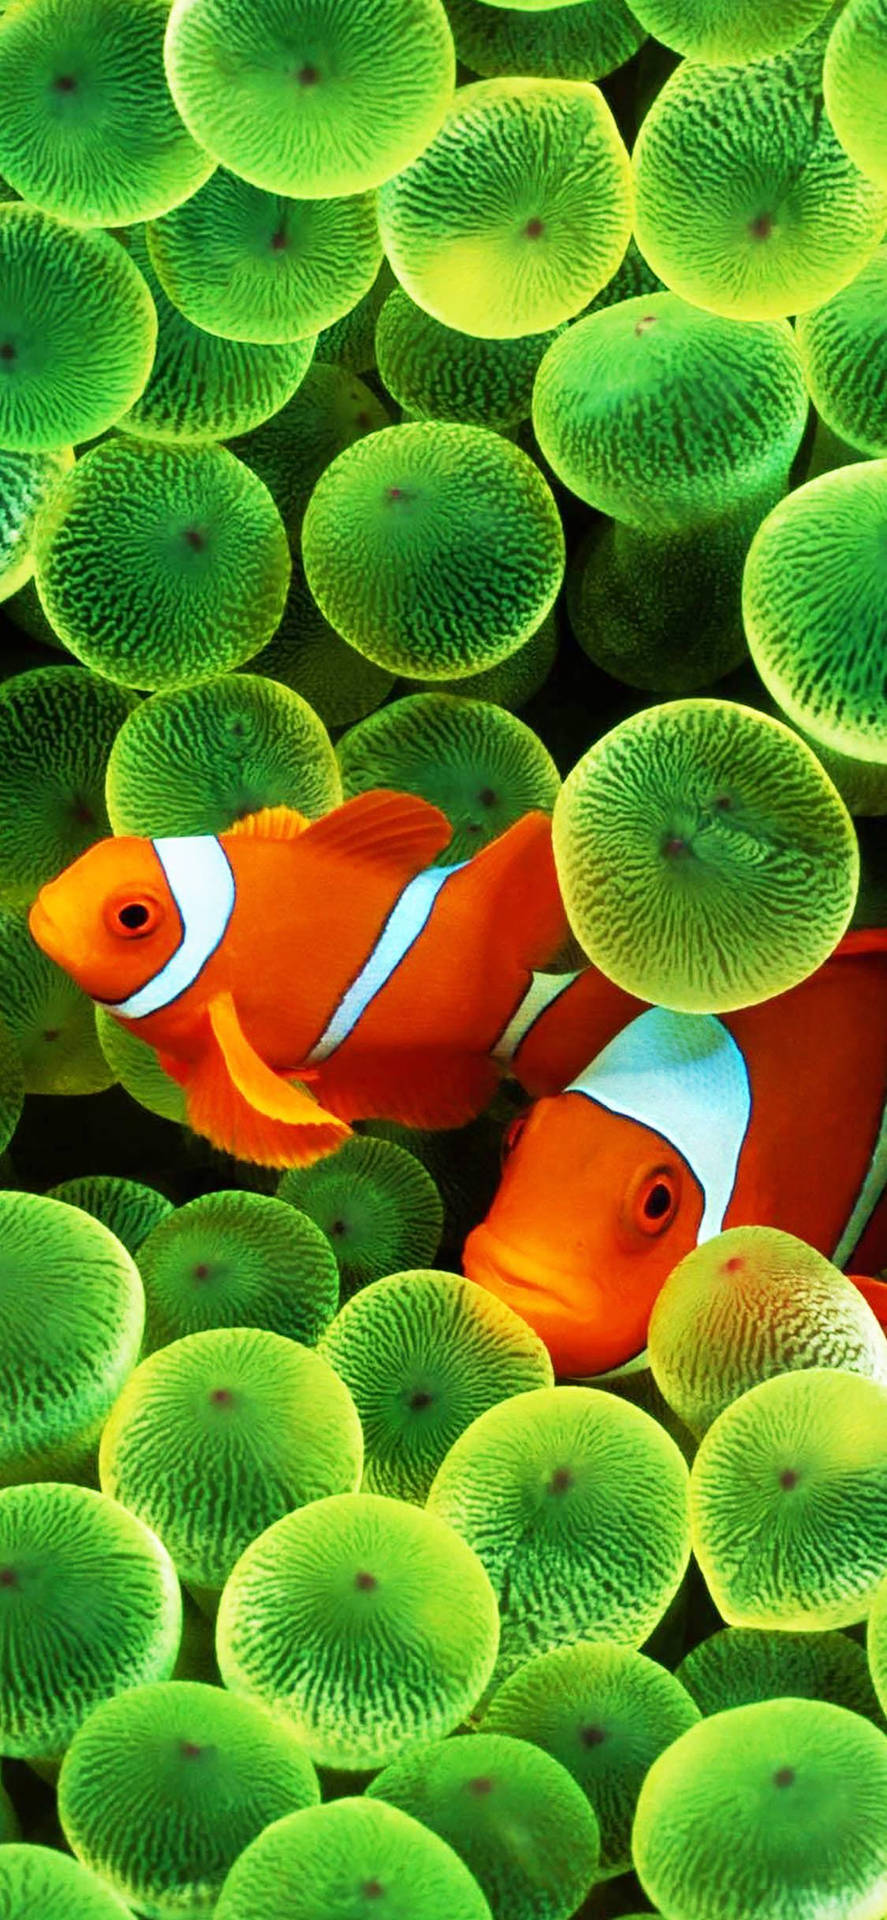 Vibrant Oled Display Of Clown Fish On Iphone